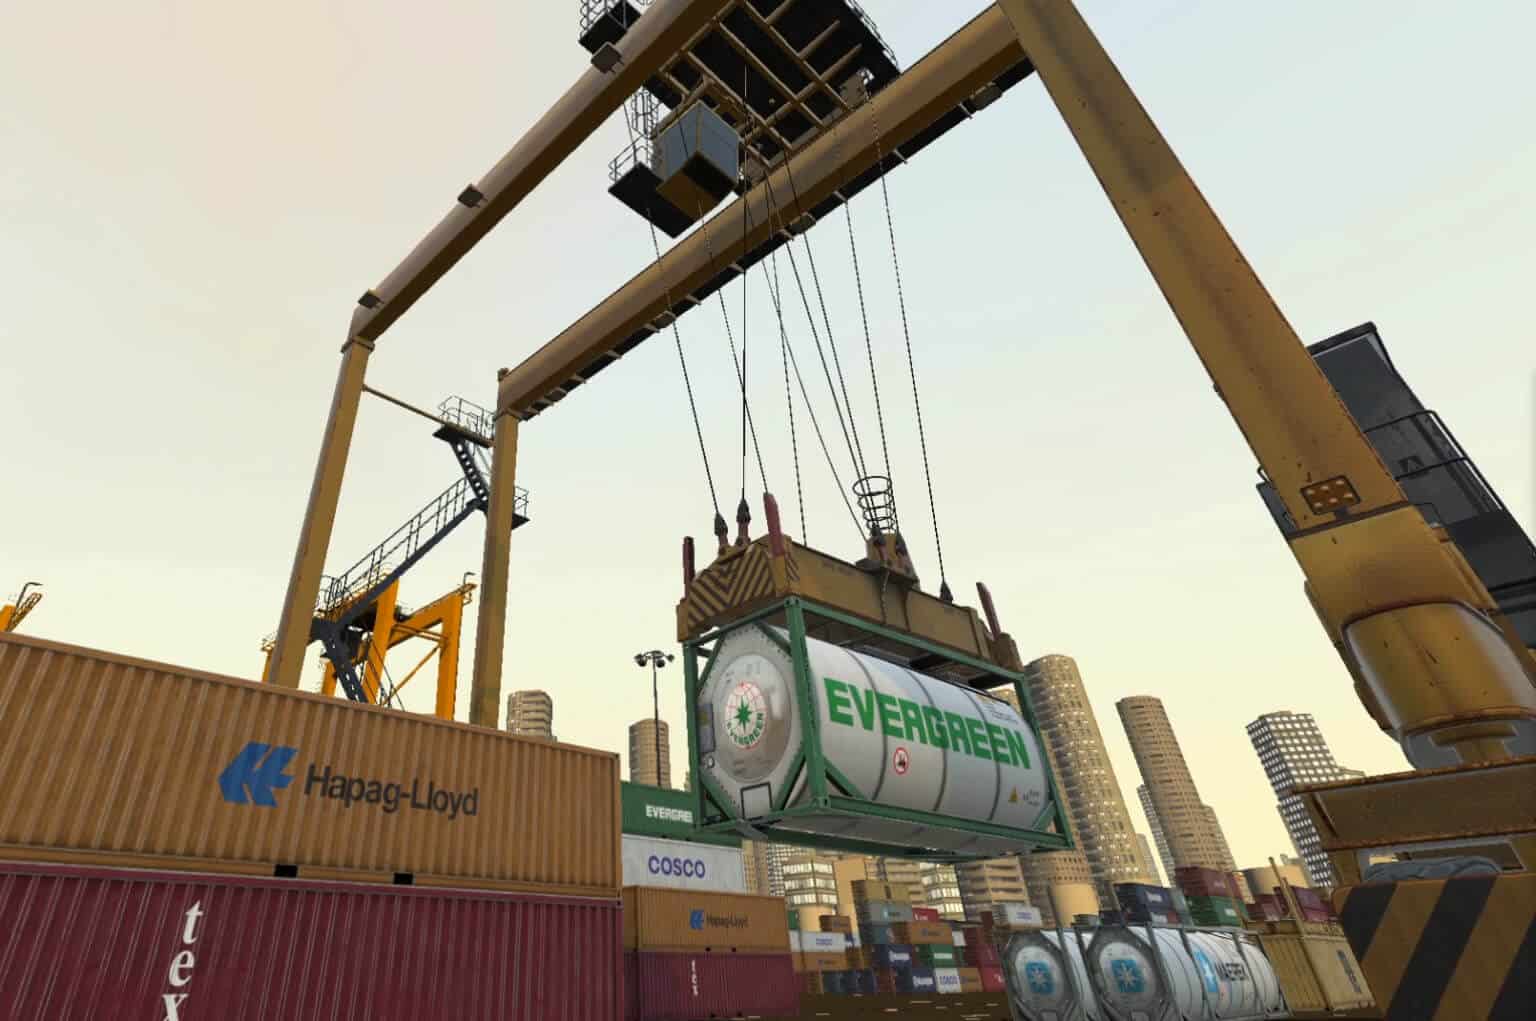 Rubber-Tyred Gantry Crane Simulator Training Pack – Lifting a load Exercise